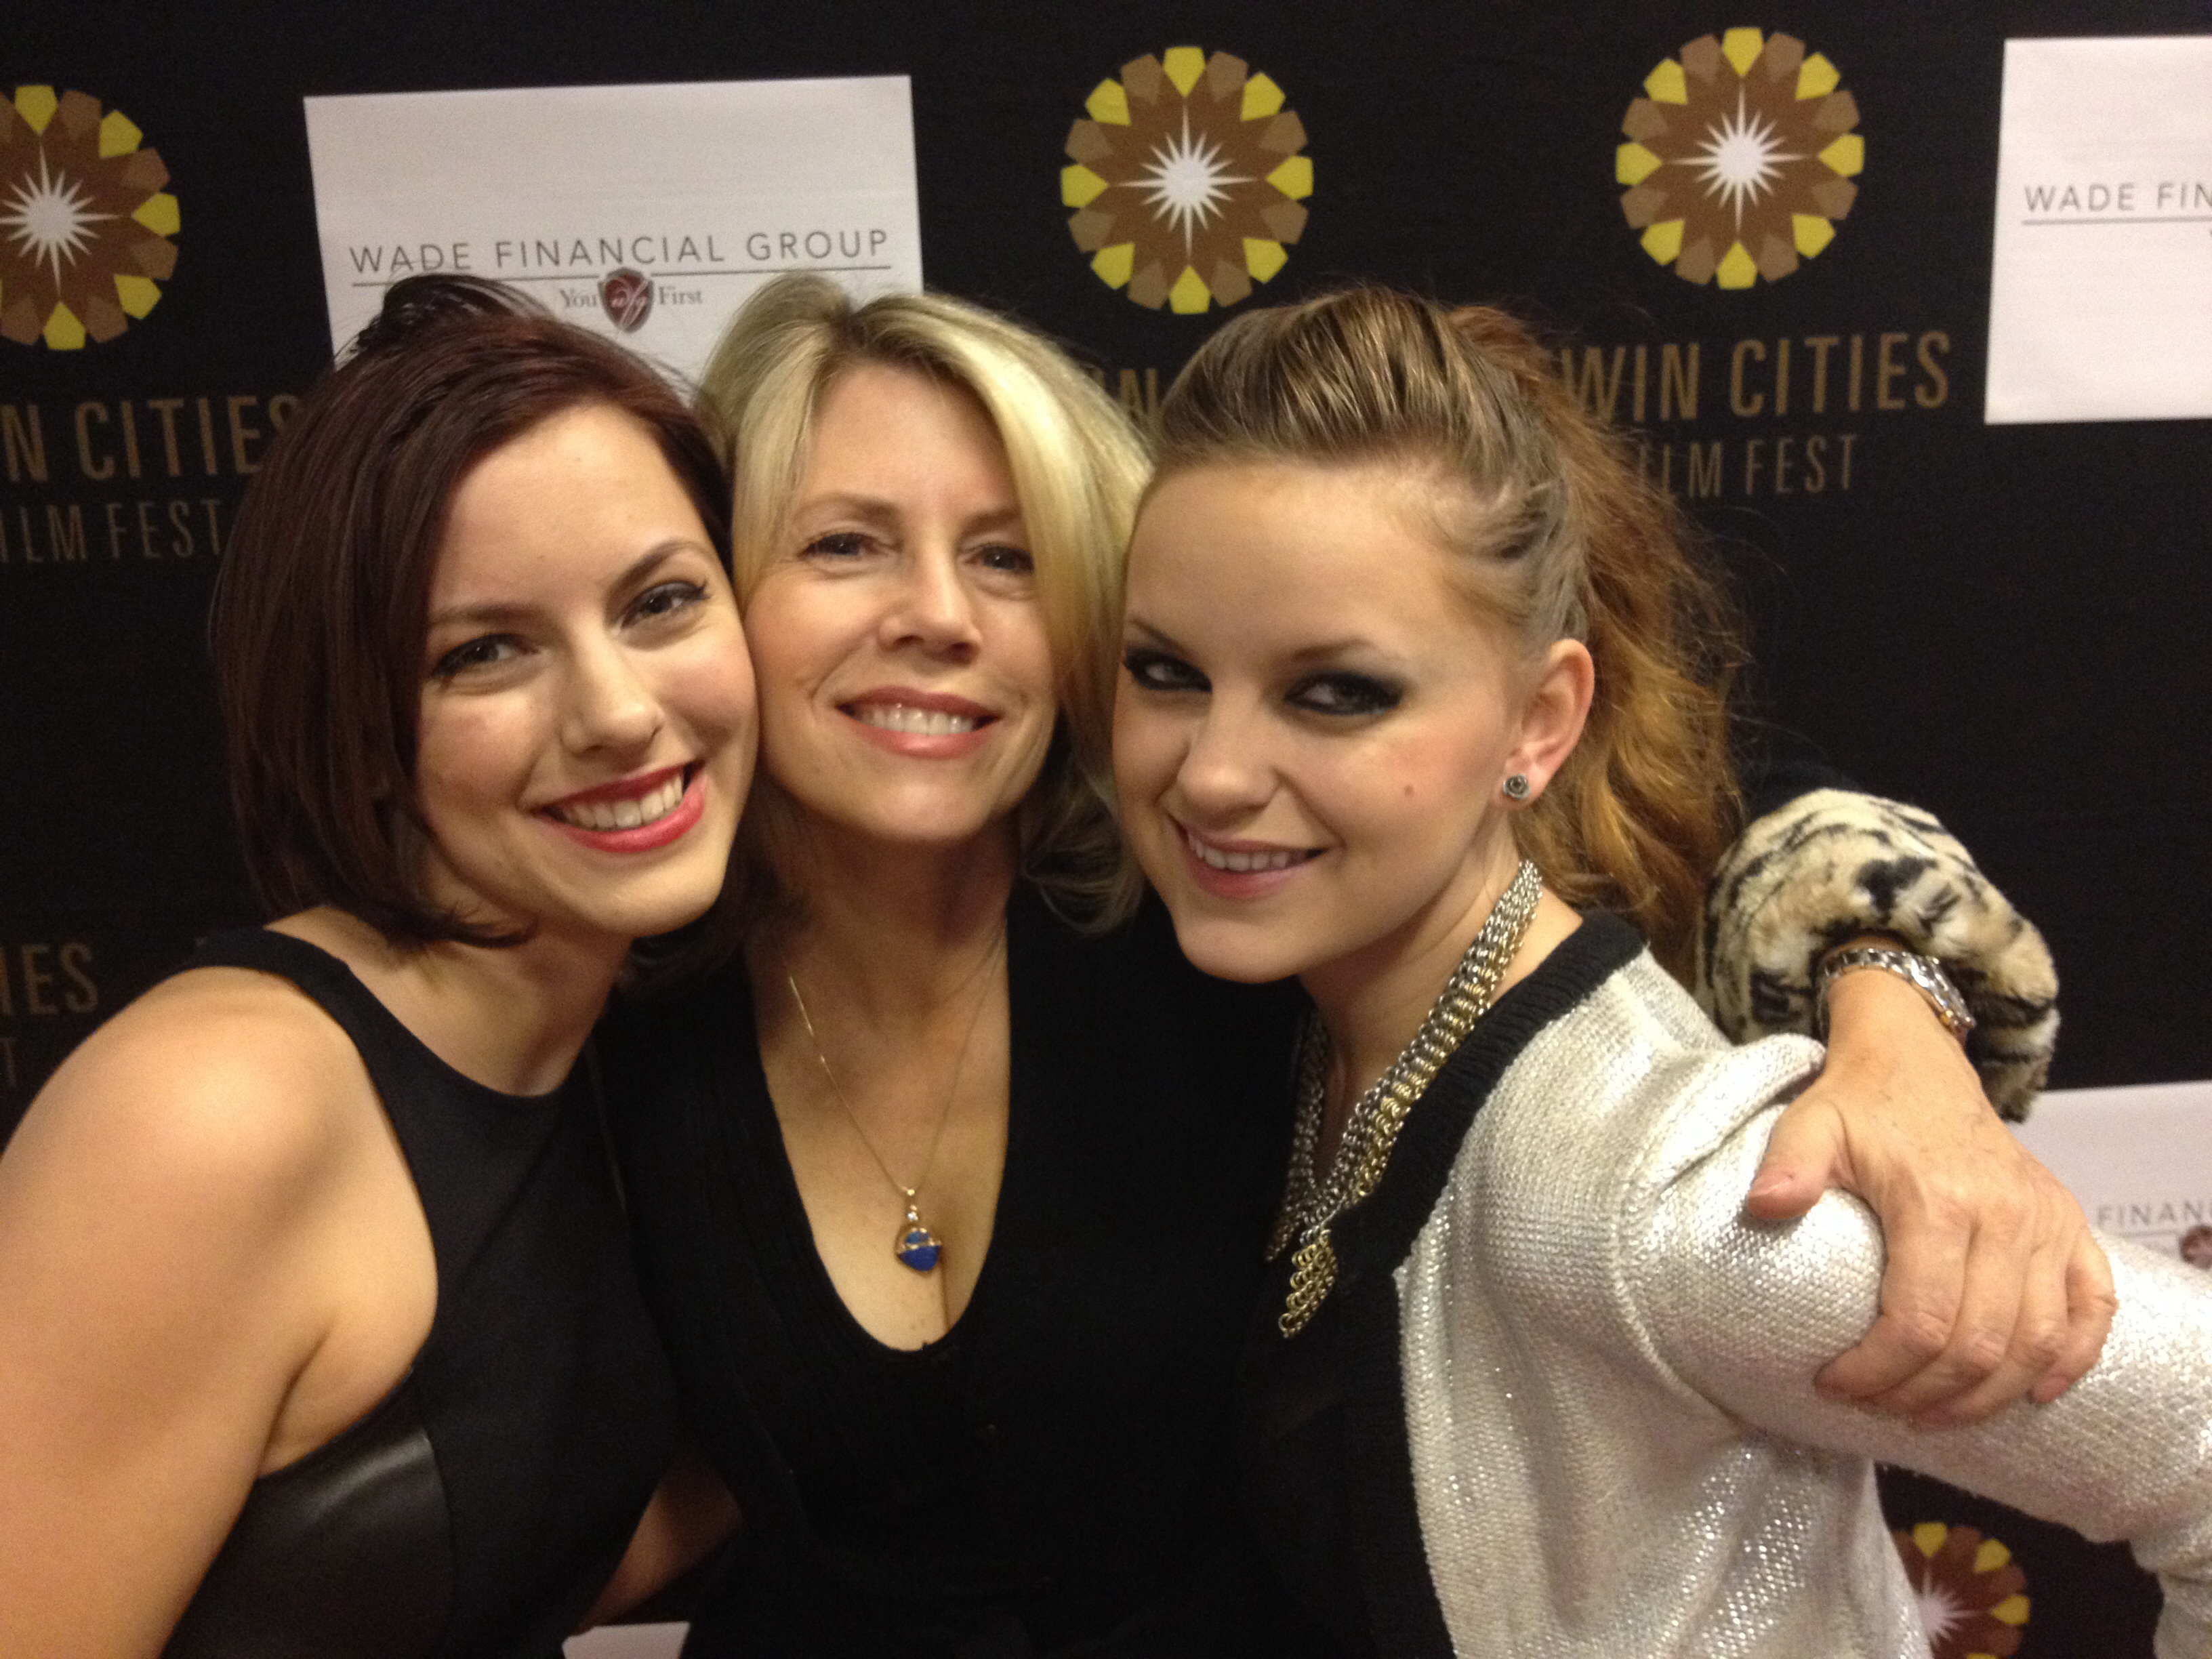 Twin Cities Film Fest 2014 with Ali Daniels, Victoria LaChelle. We were all in film 